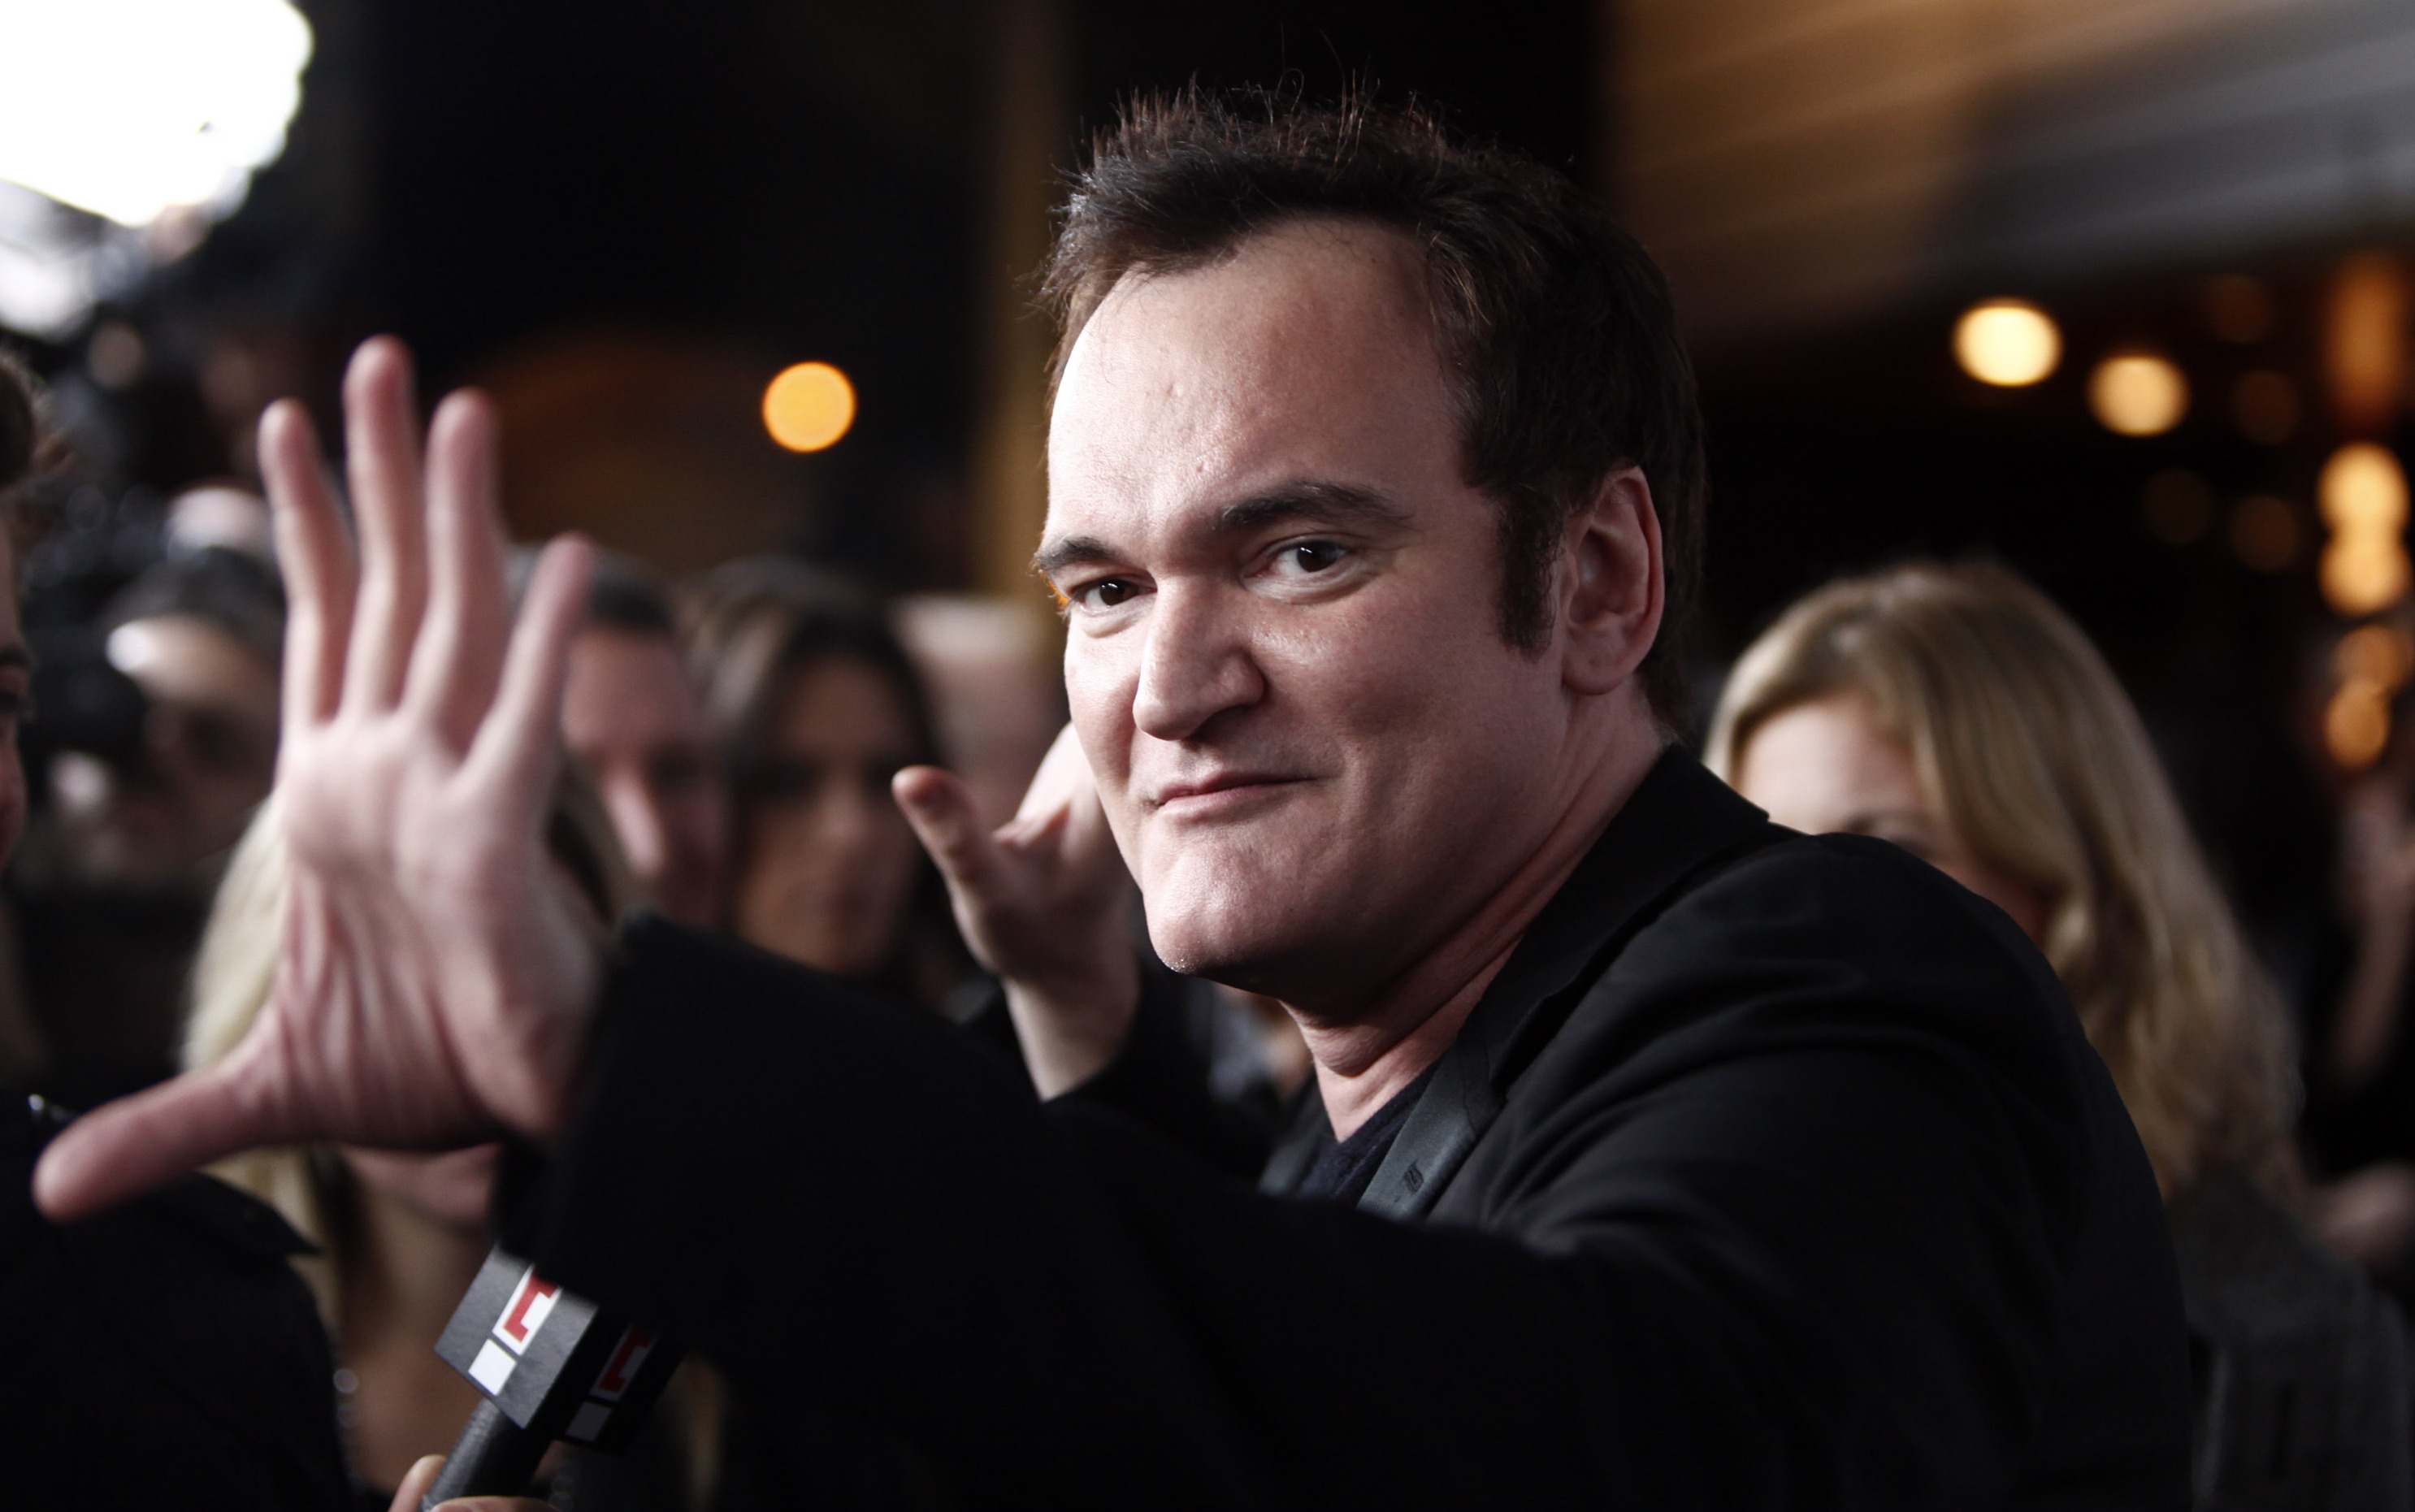 Quentin Tarantino Fires Shots At Ben Affleck While Connecting The